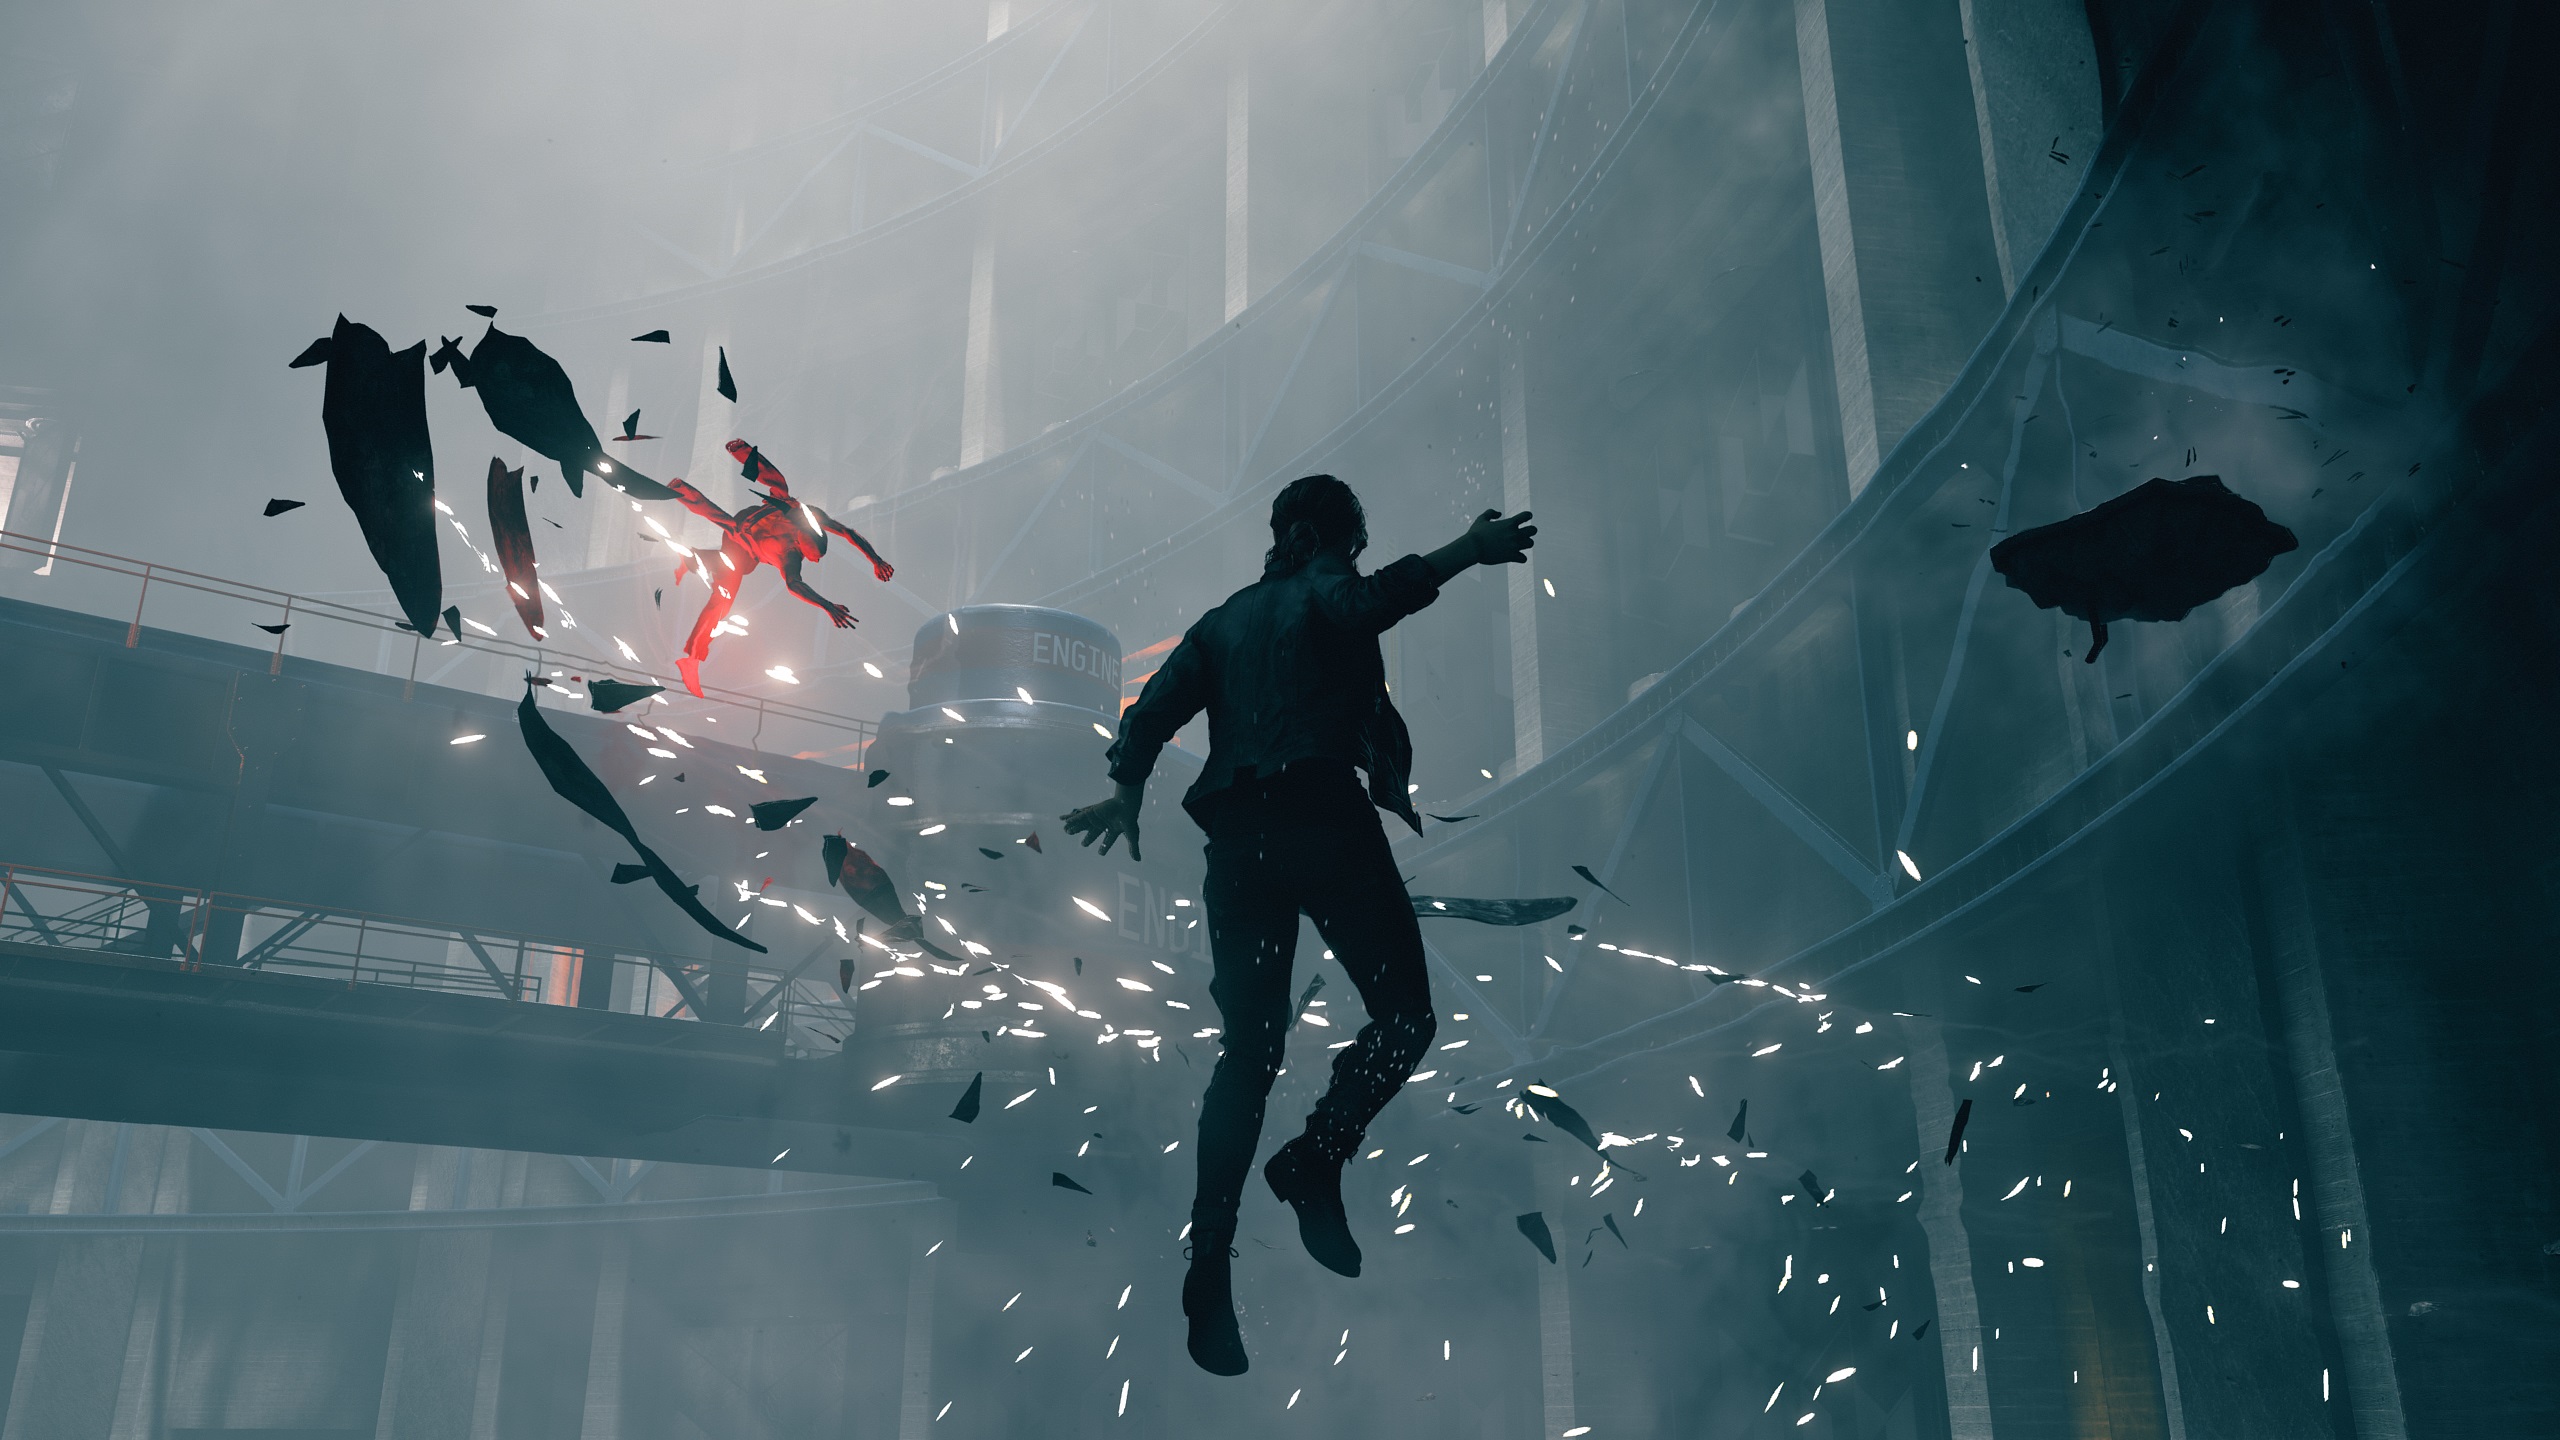 Remedy Entertainment Announces “Control” for PC, PS4, and Xbox One